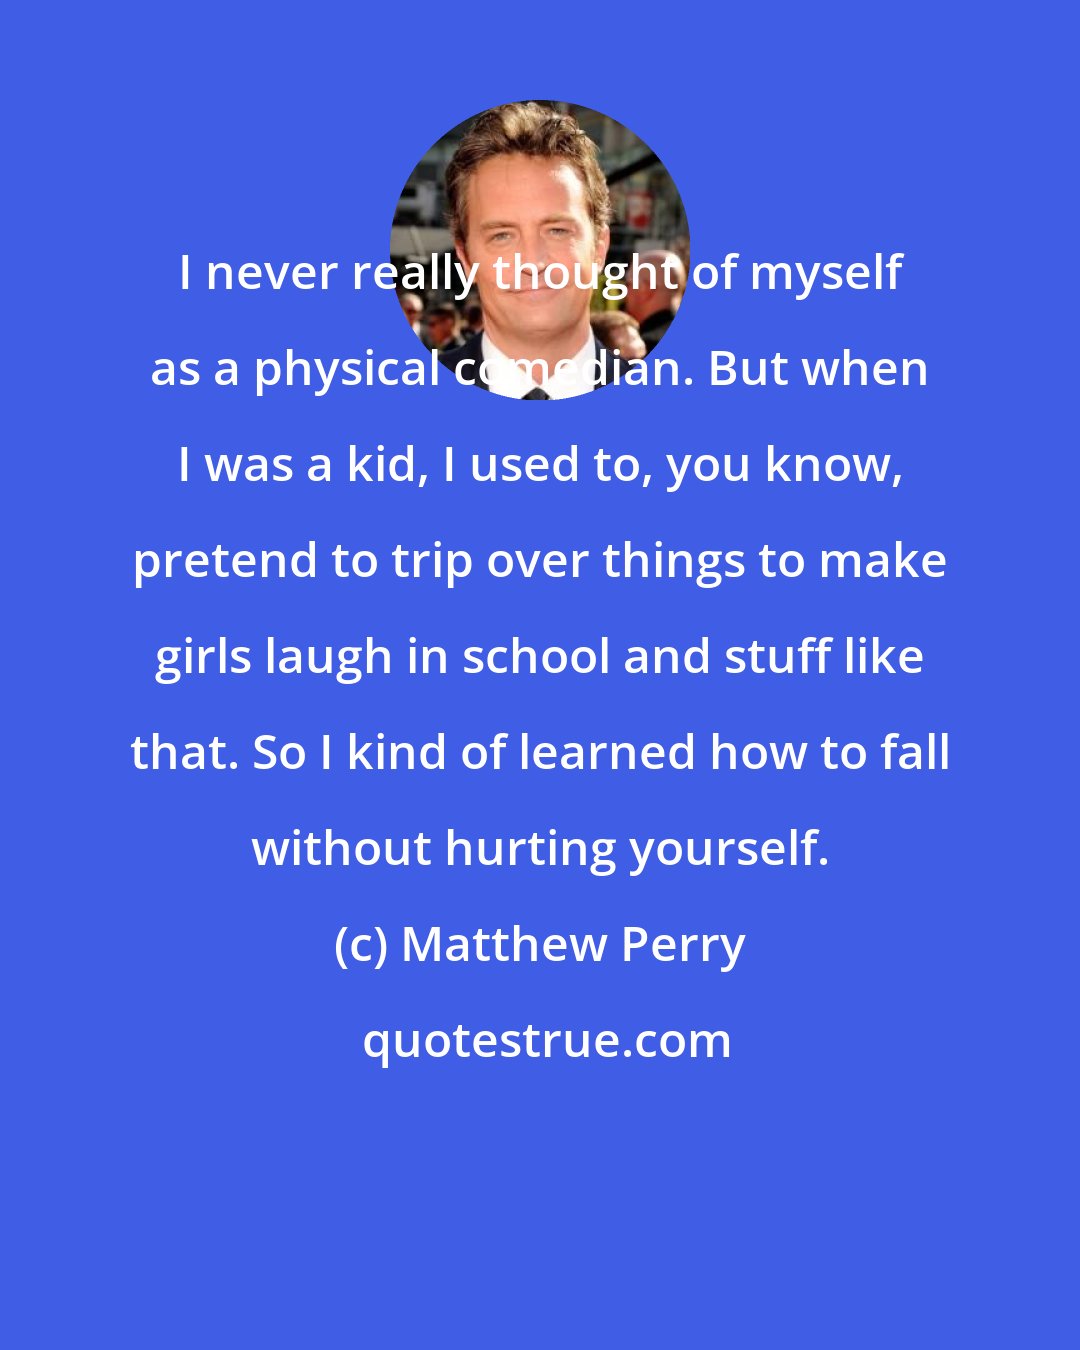 Matthew Perry: I never really thought of myself as a physical comedian. But when I was a kid, I used to, you know, pretend to trip over things to make girls laugh in school and stuff like that. So I kind of learned how to fall without hurting yourself.